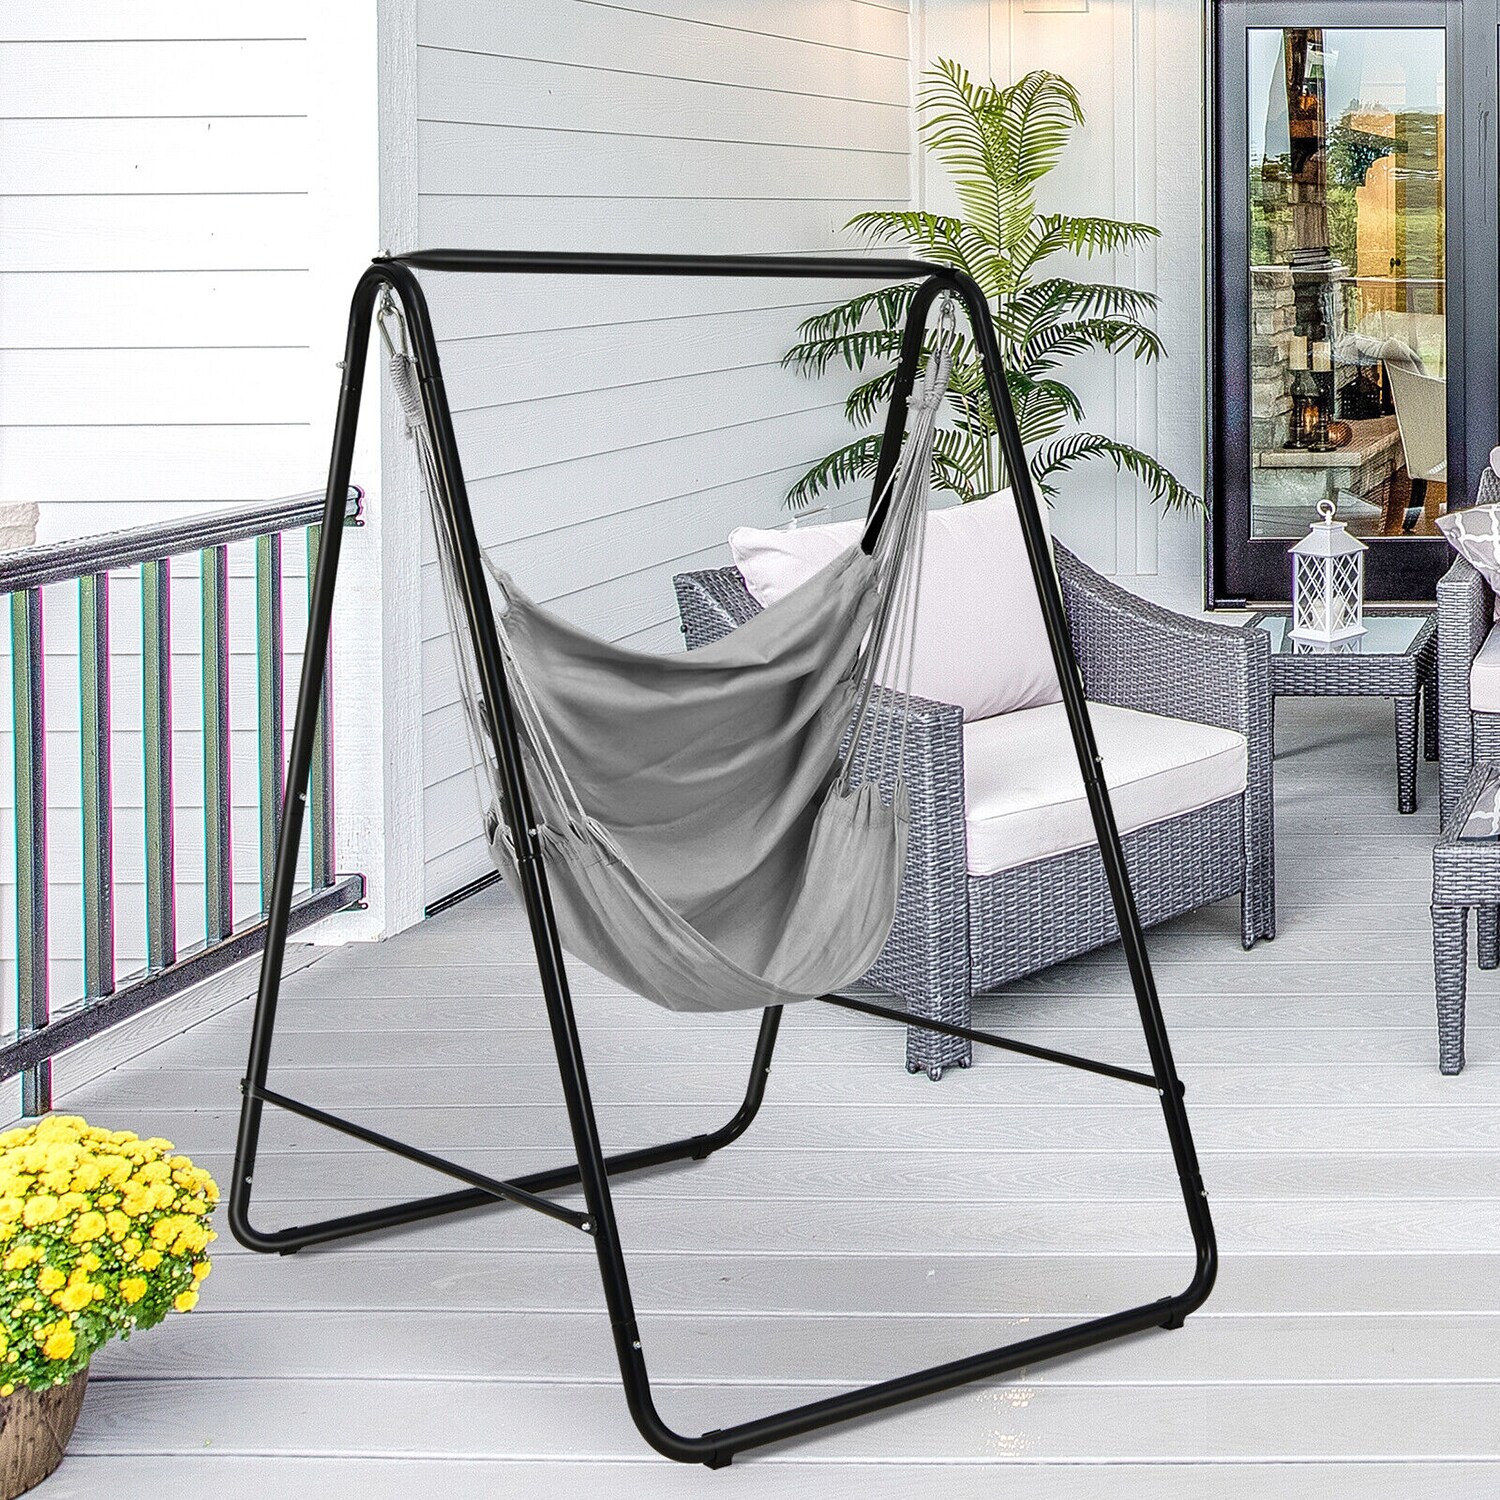 Clihome Outdoor Hammock with Stand Grey Fabric Hammock Chair with Stand Cotton | CL-GR-10577